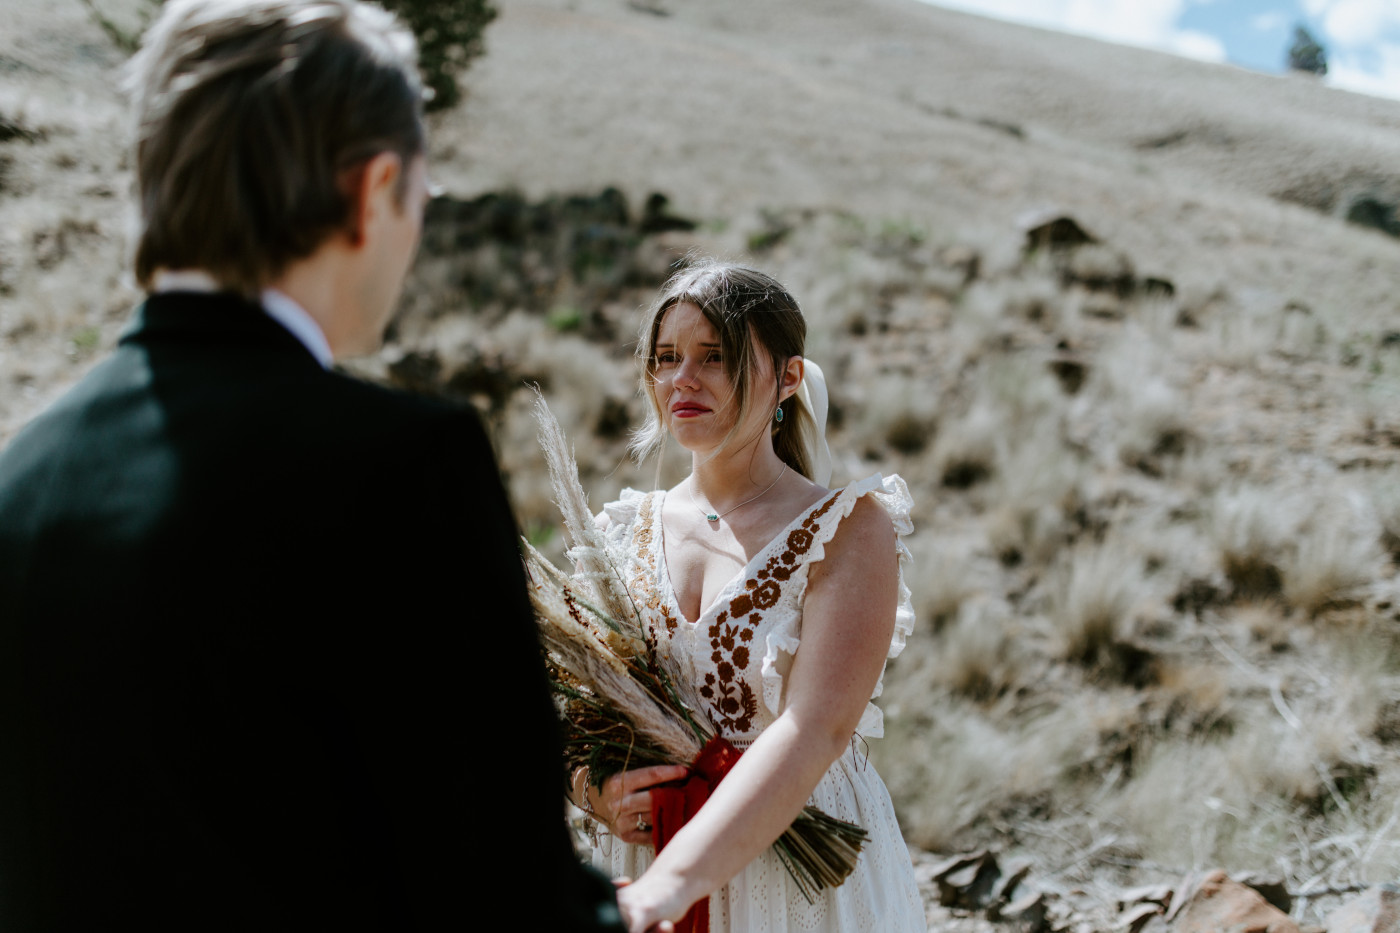 Emily looks at Greyson during their elopement. Elopement photography in the Central Oregon desert by Sienna Plus Josh.